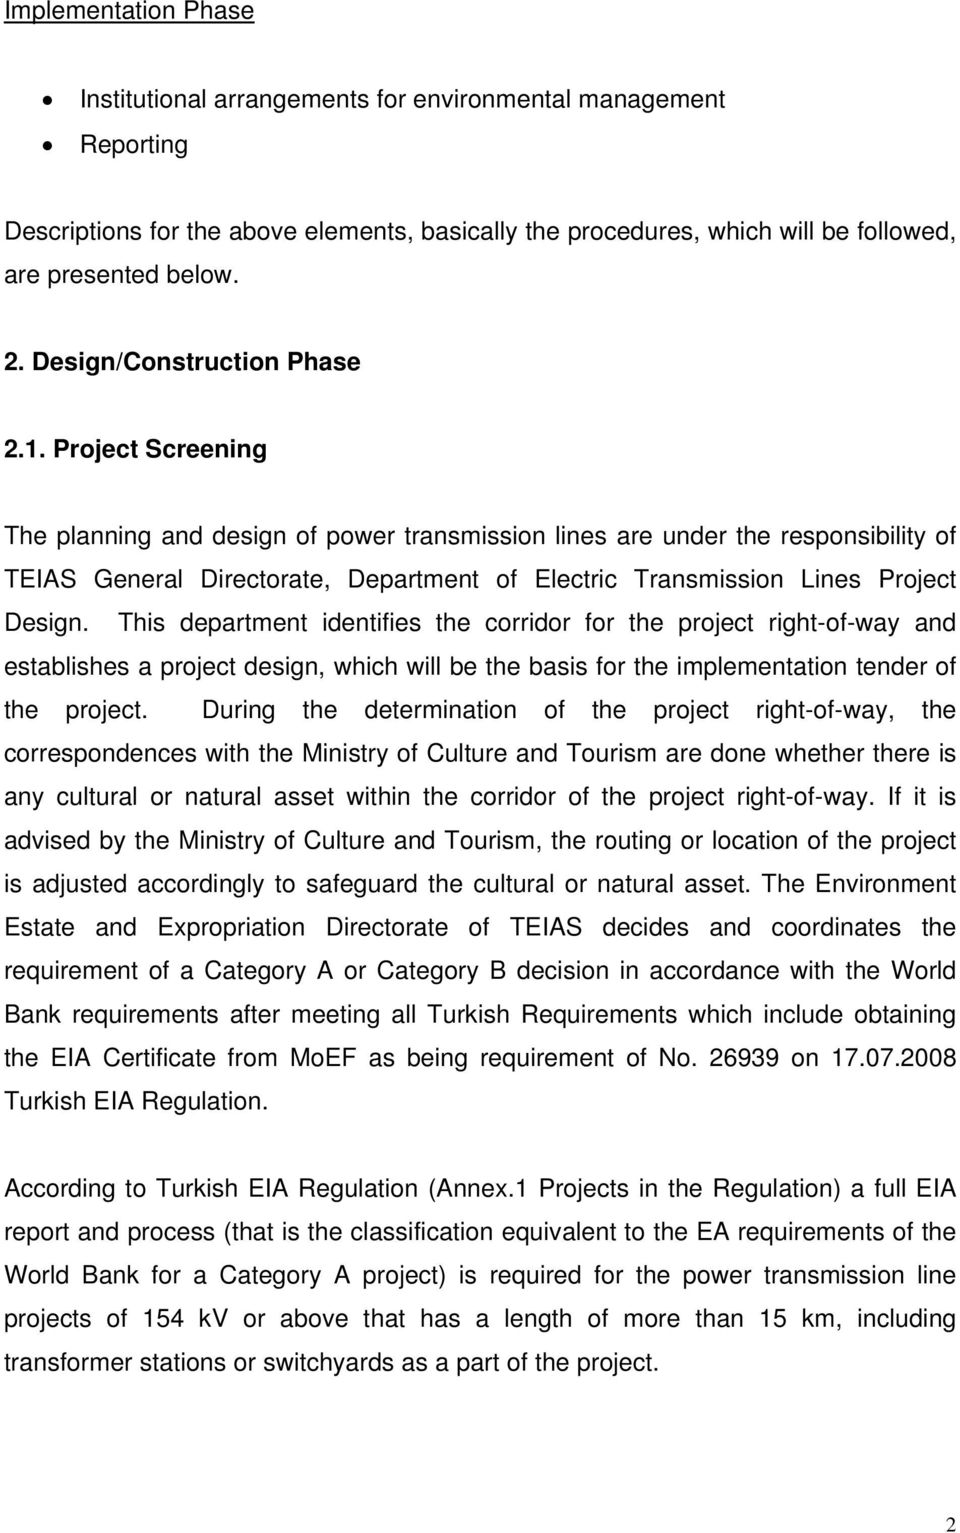 Project Screening The planning and design of power transmission lines are under the responsibility of TEIAS General Directorate, Department of Electric Transmission Lines Project Design.